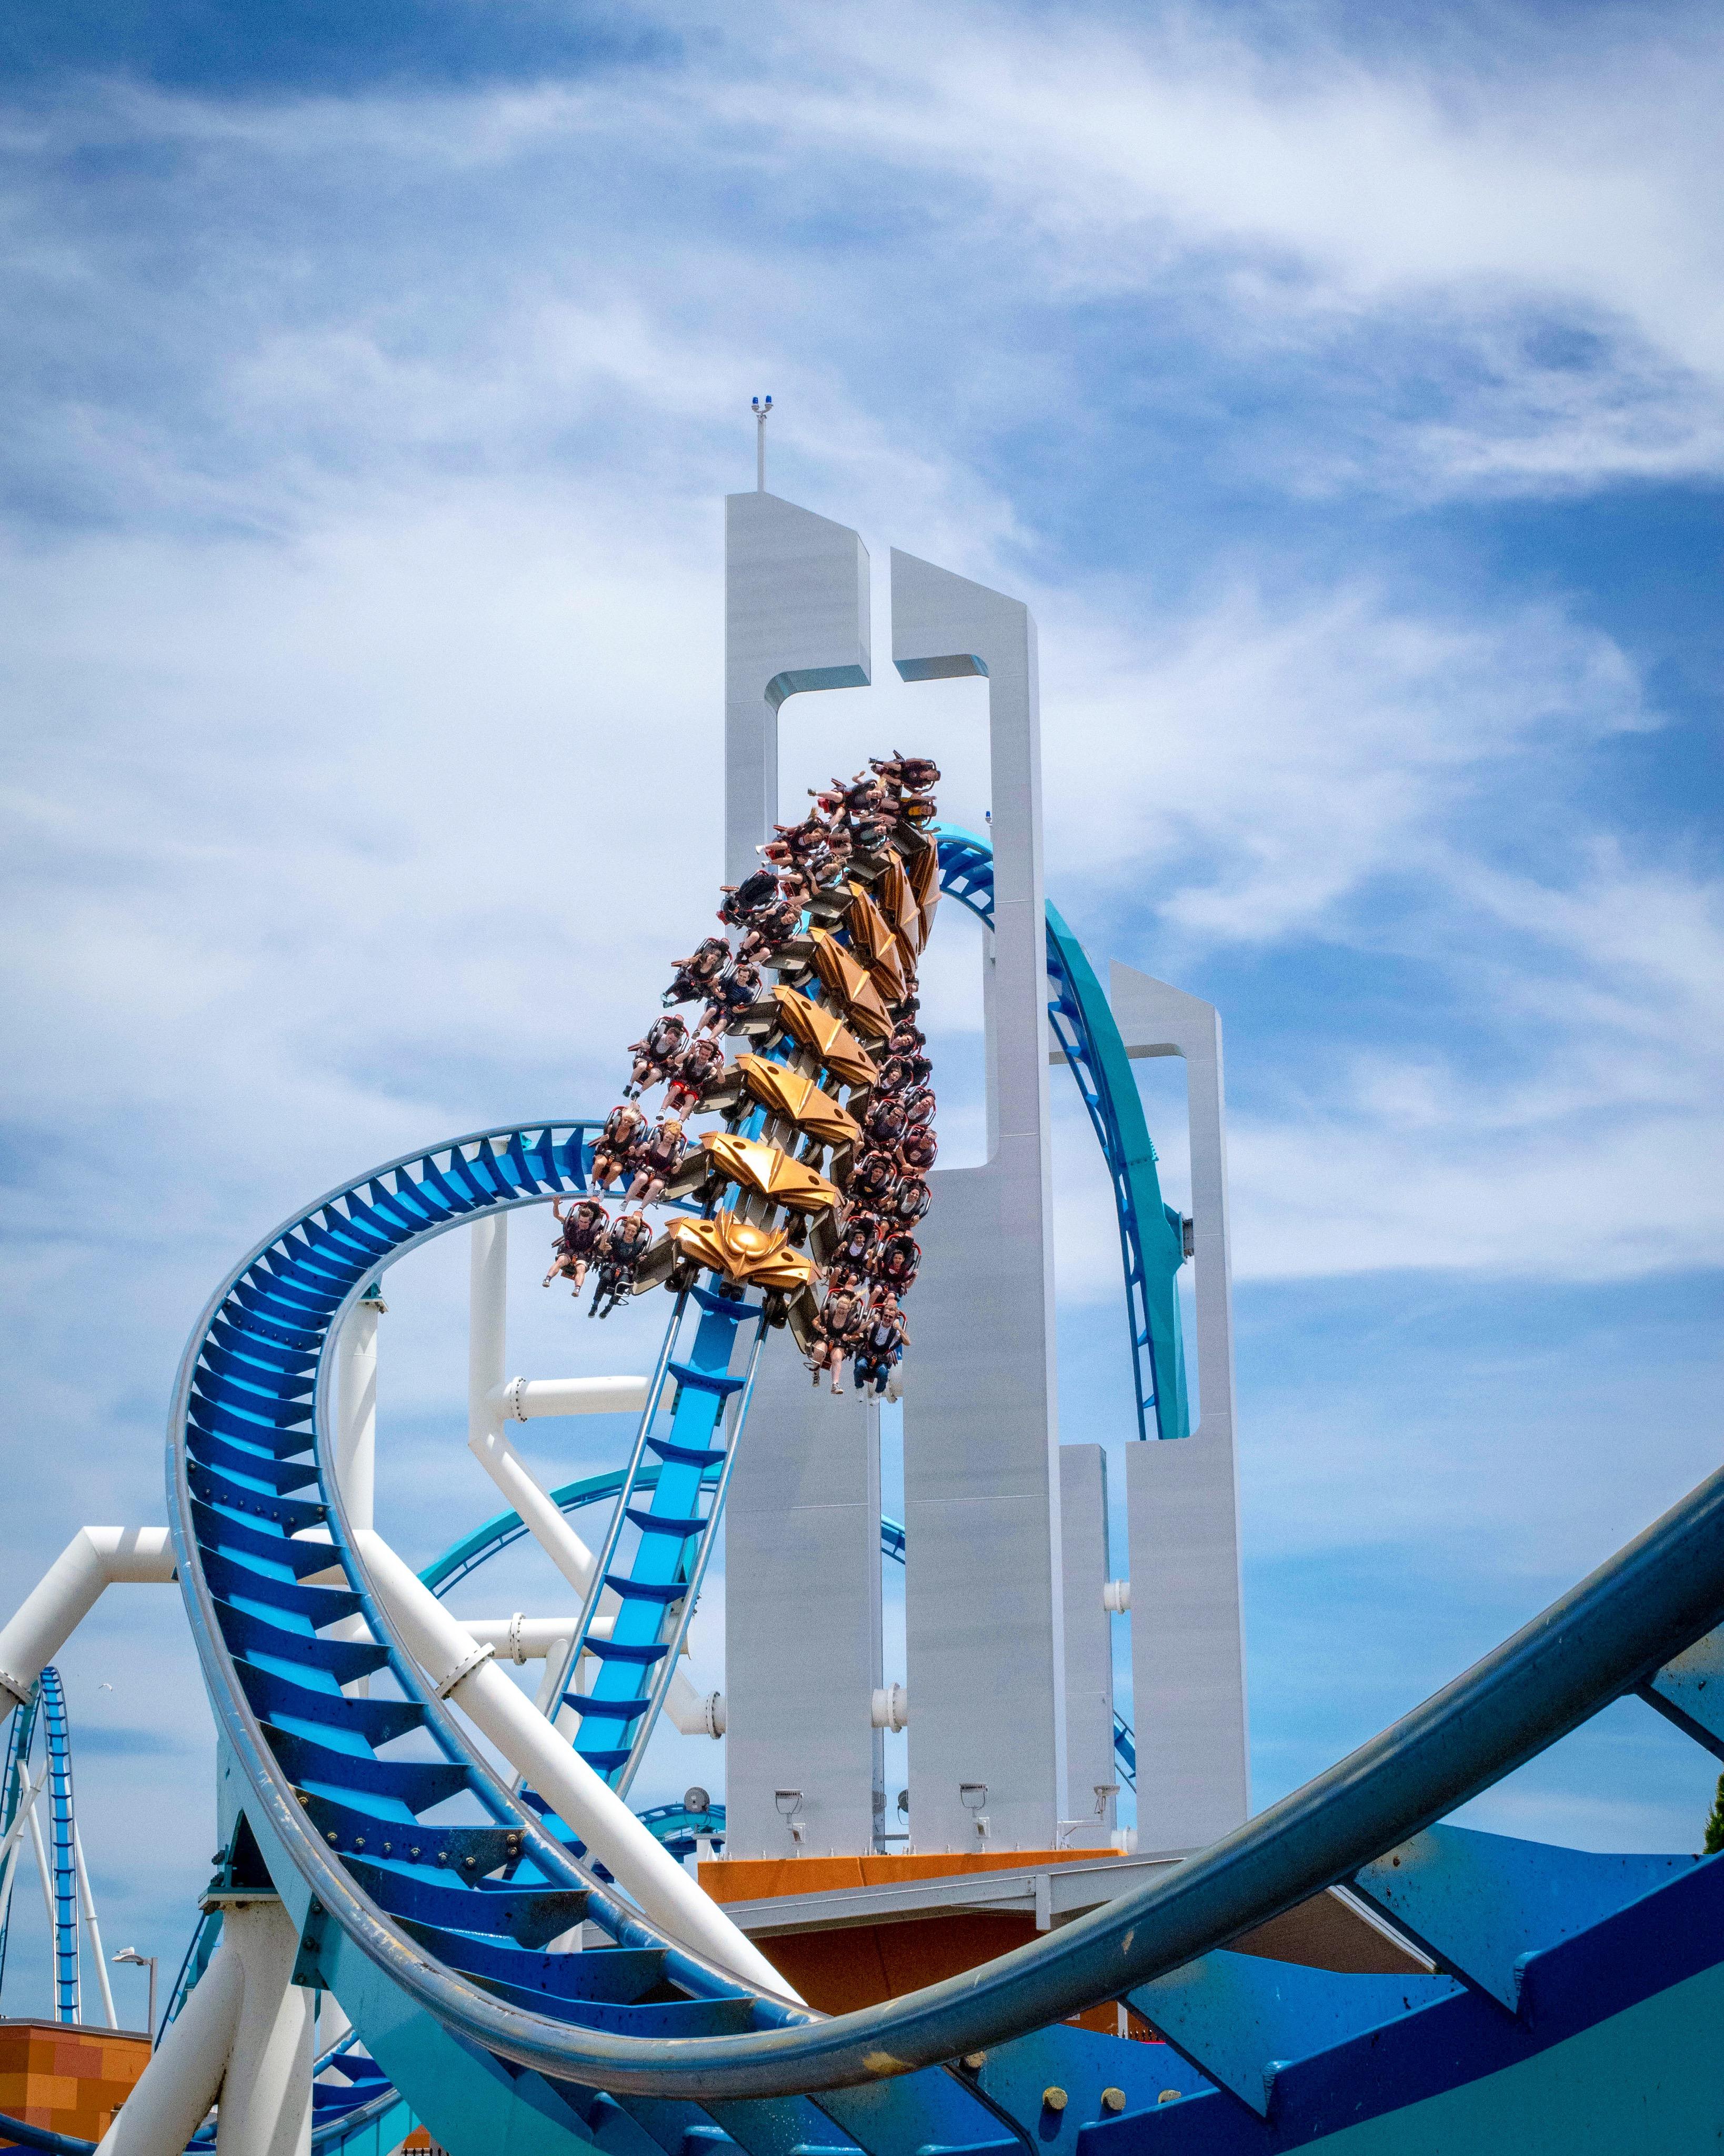 A picture from Thursday of gatekeeper. For more follow me on instagram and youtube coasterpassport